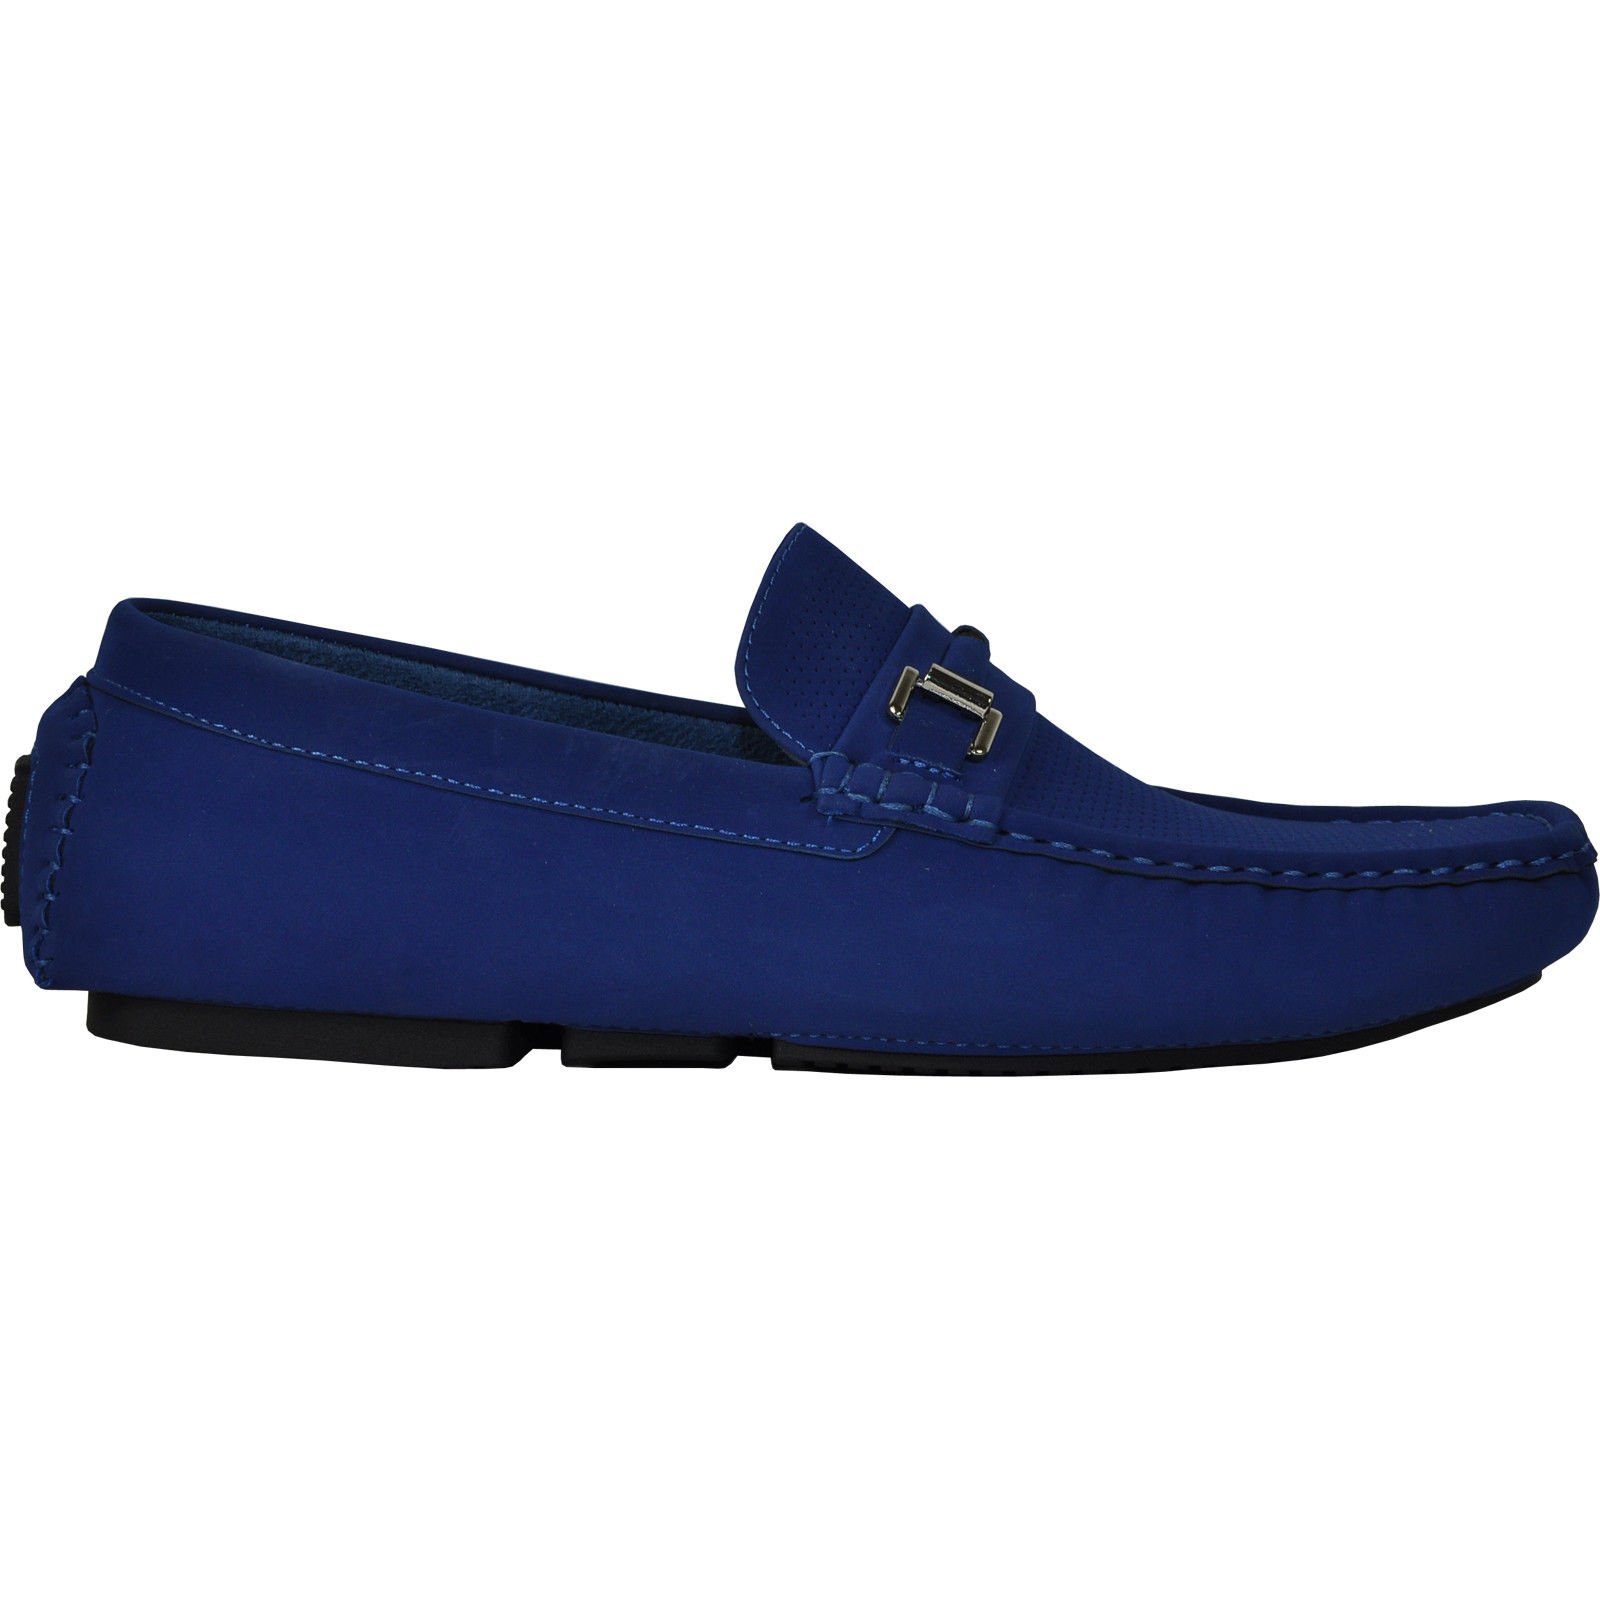 Bravo! Men Casual Shoe Todd-1 Driving Moccasin Blue 13M US - image 4 of 7